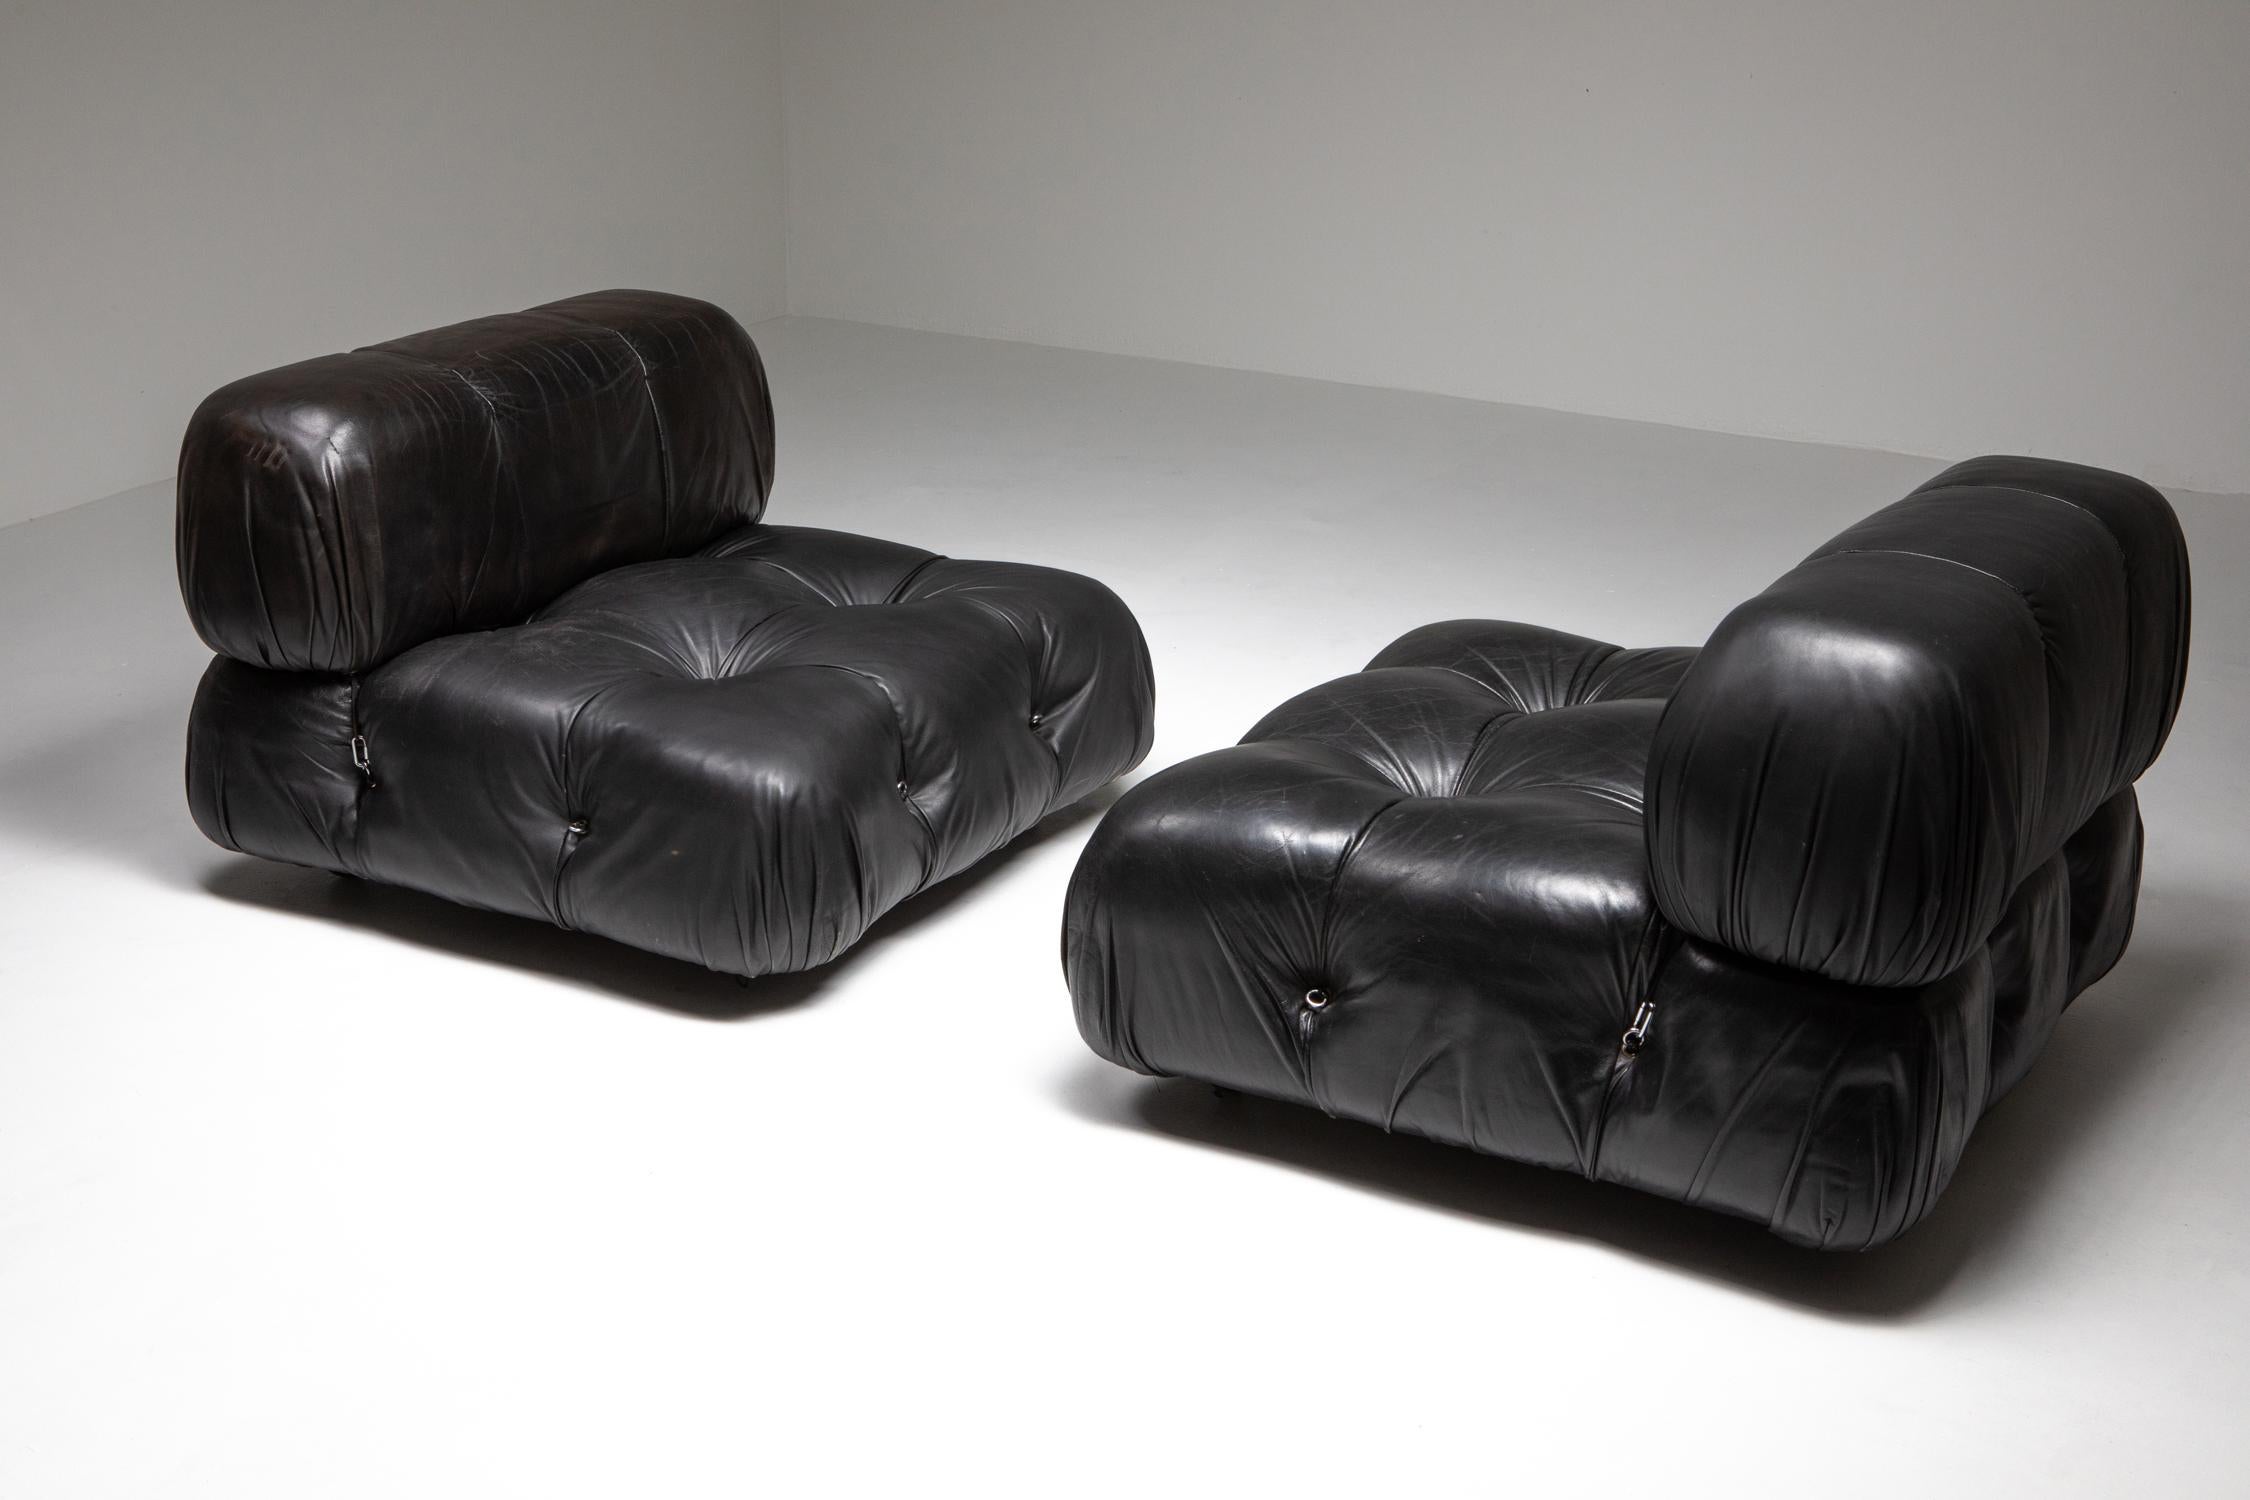 Camaleonda seat, Mario Bellini, C&B Italia, 1970s

Black leather original upholstery

This design became famous almost immediately after it was featured in the exhibition 'Italy and The New Domestic Landscape' in the MoMA Museum in 1972. Mario